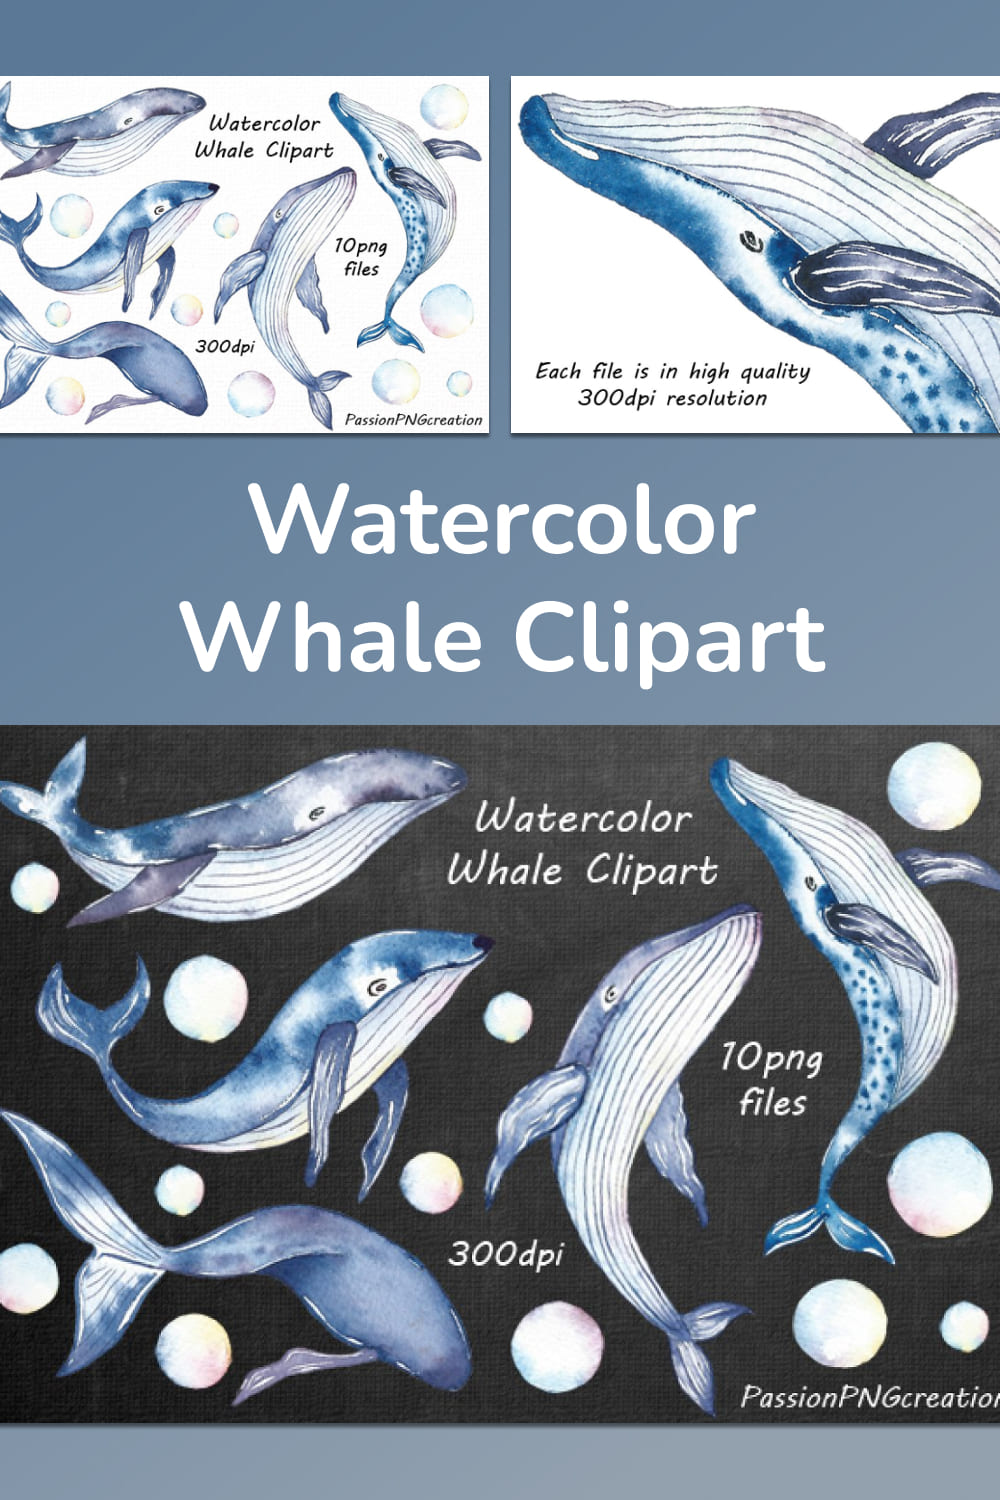 Watercolor Whale Clipart Collection pinterest image.